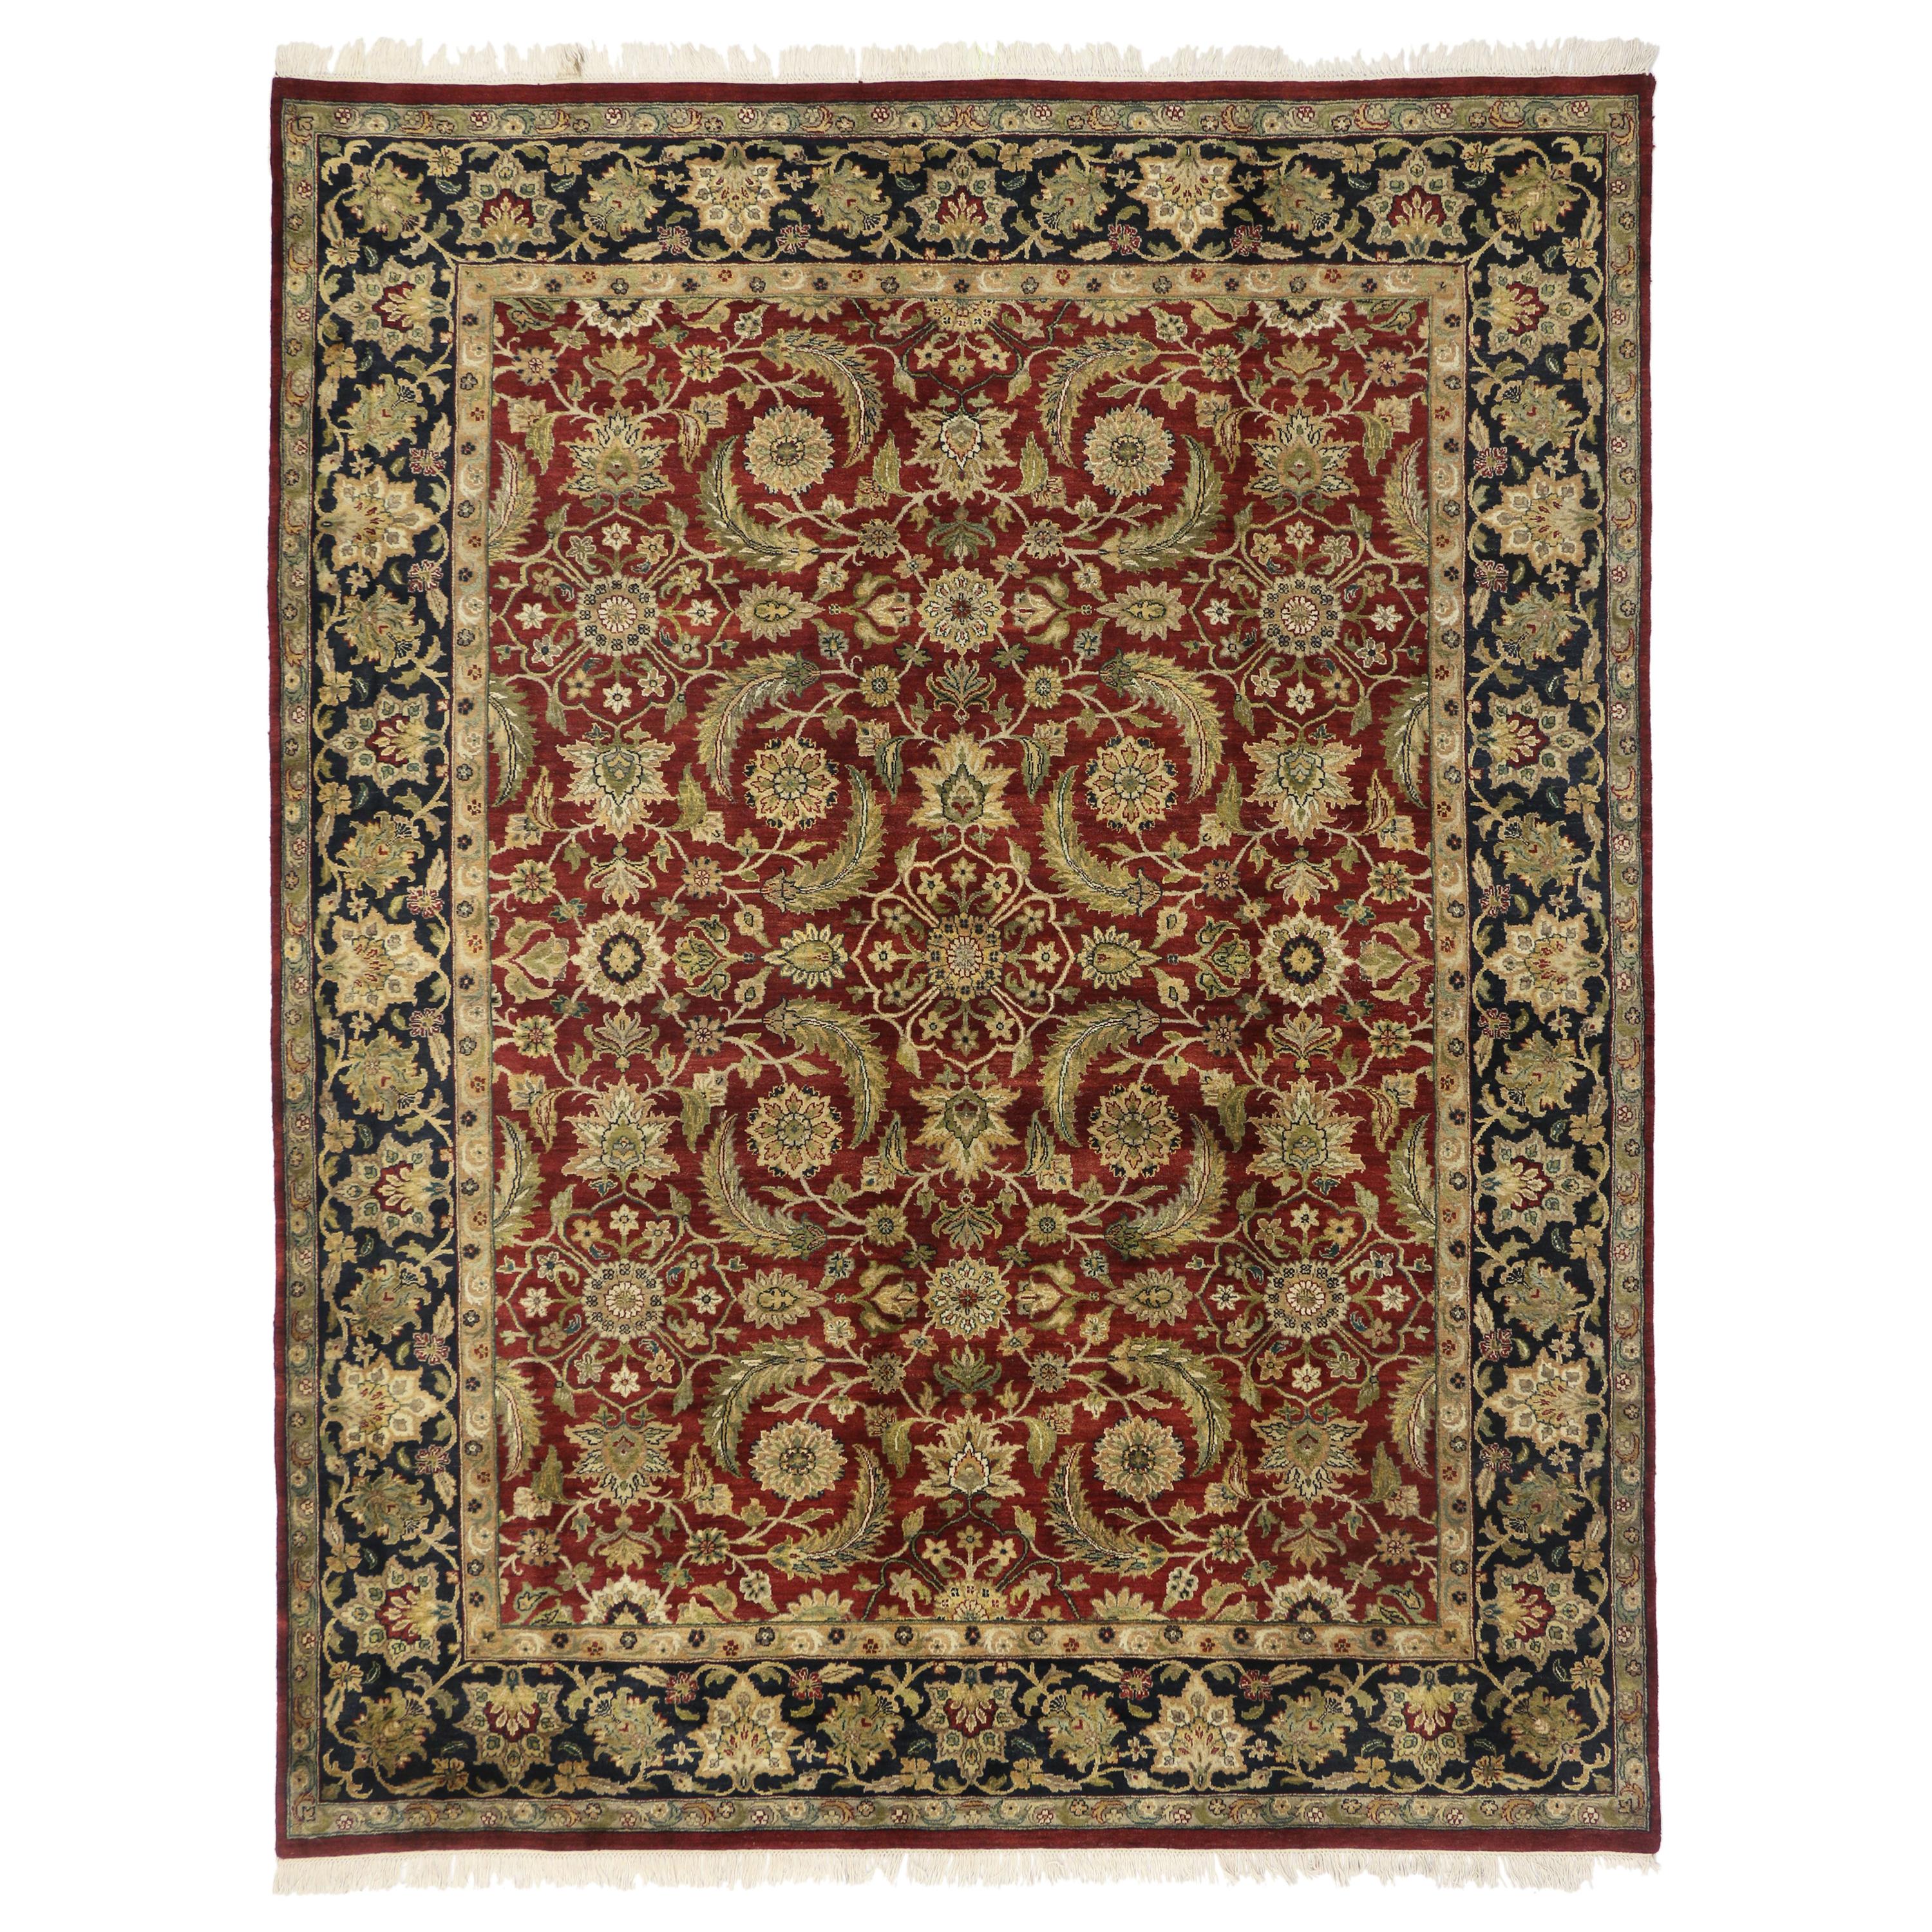 Vintage Traditional Indian Area Rug with Persian Design and Manor House Style